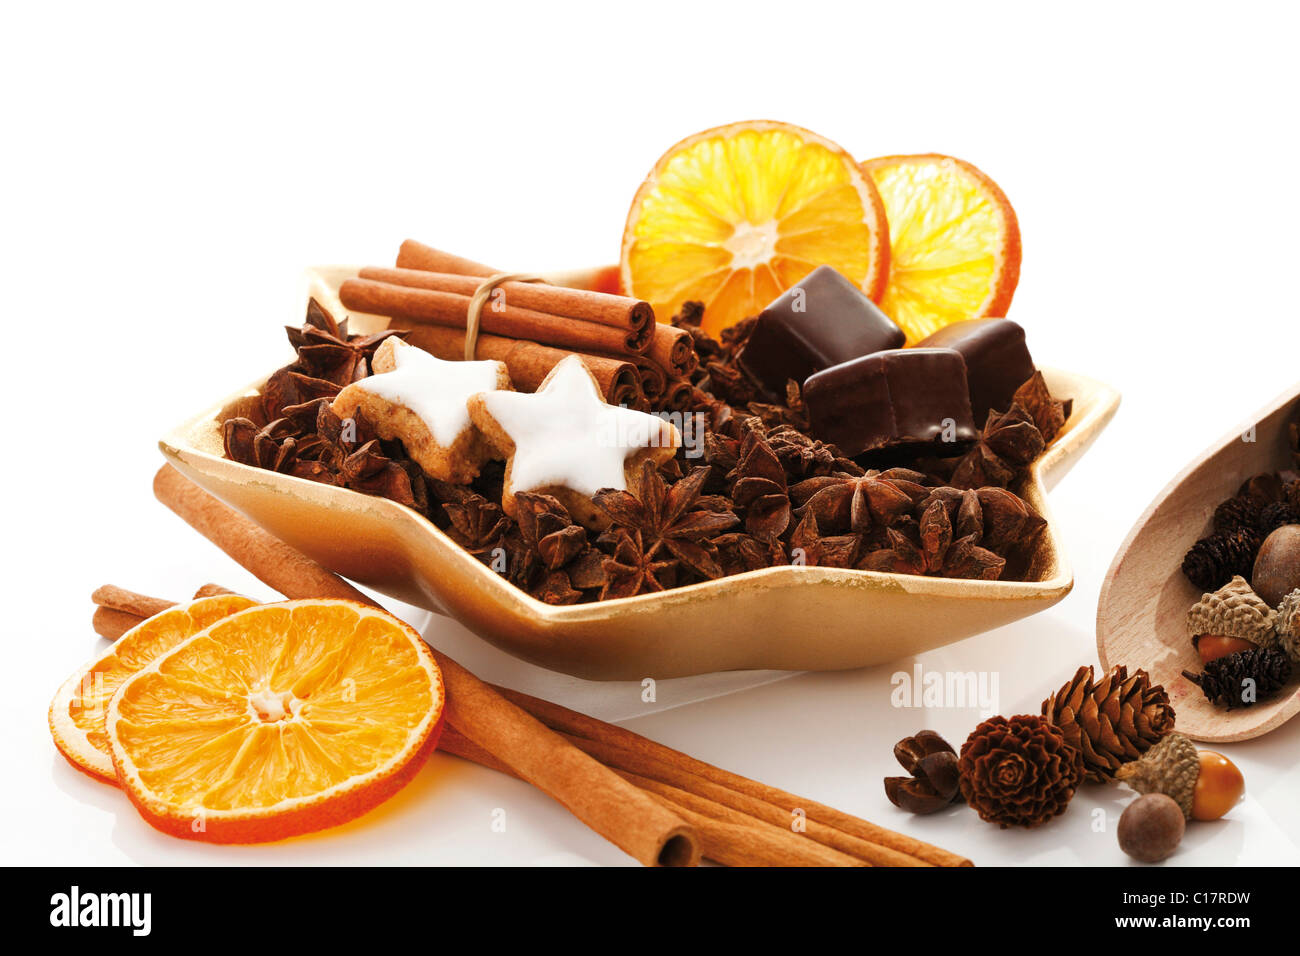 Star-shaped platter with star anise, cinnammon sticks, dried organge slices, cinnammon star-shaped biscuits and dominos Stock Photo